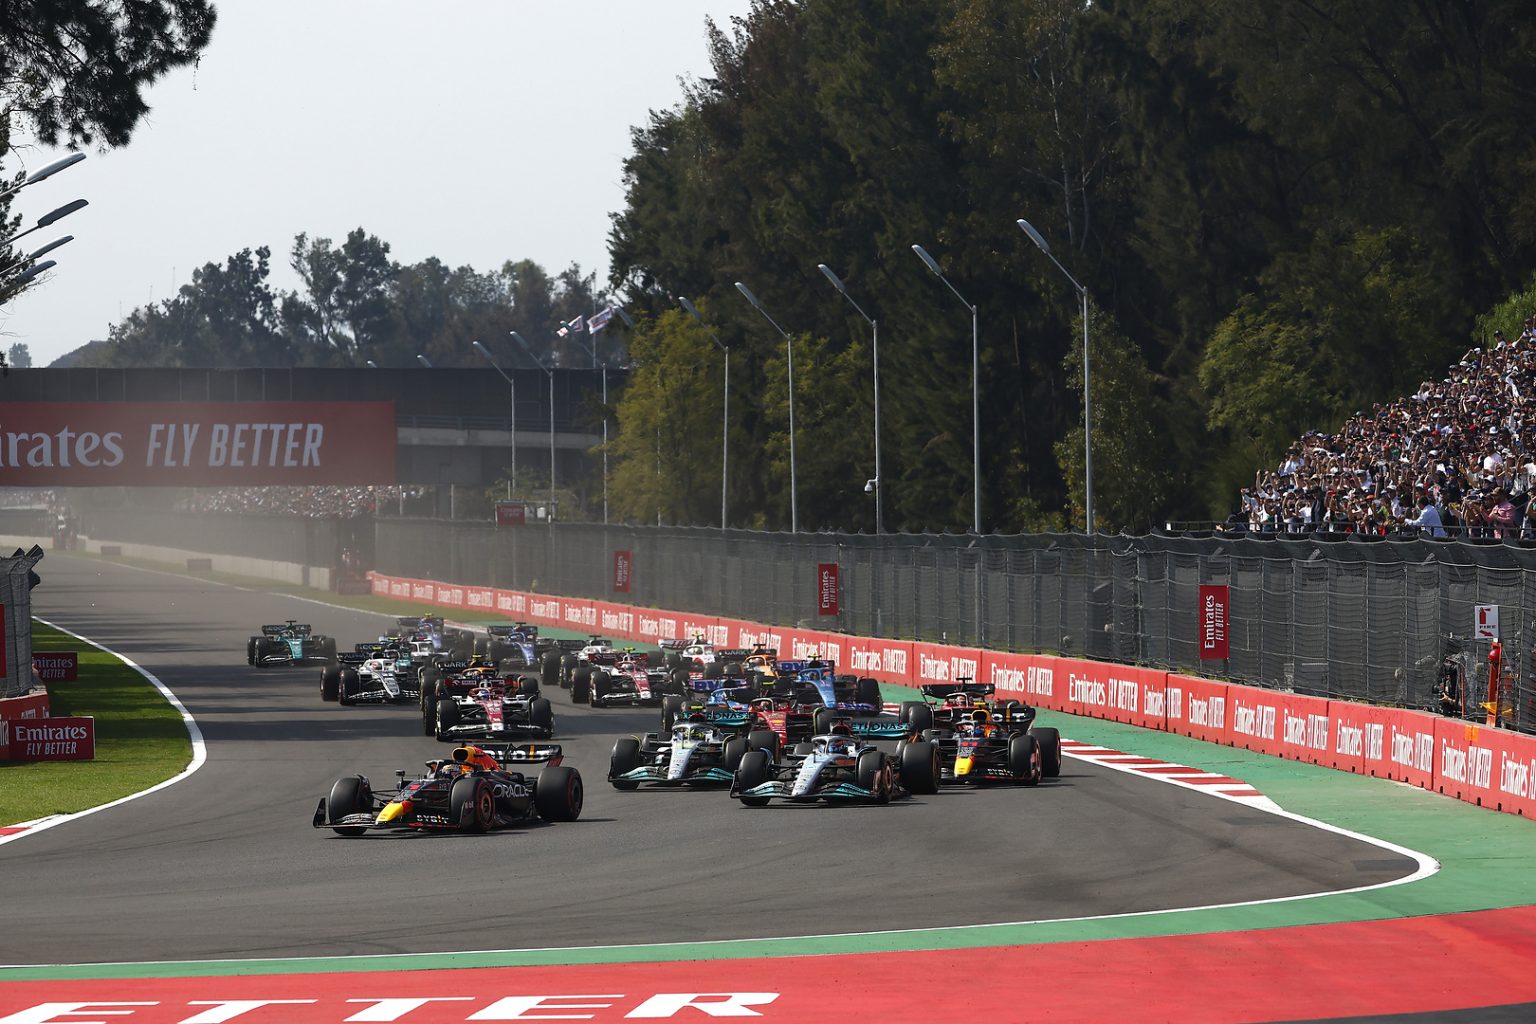 F1 TV Ratings Another High for ESPN